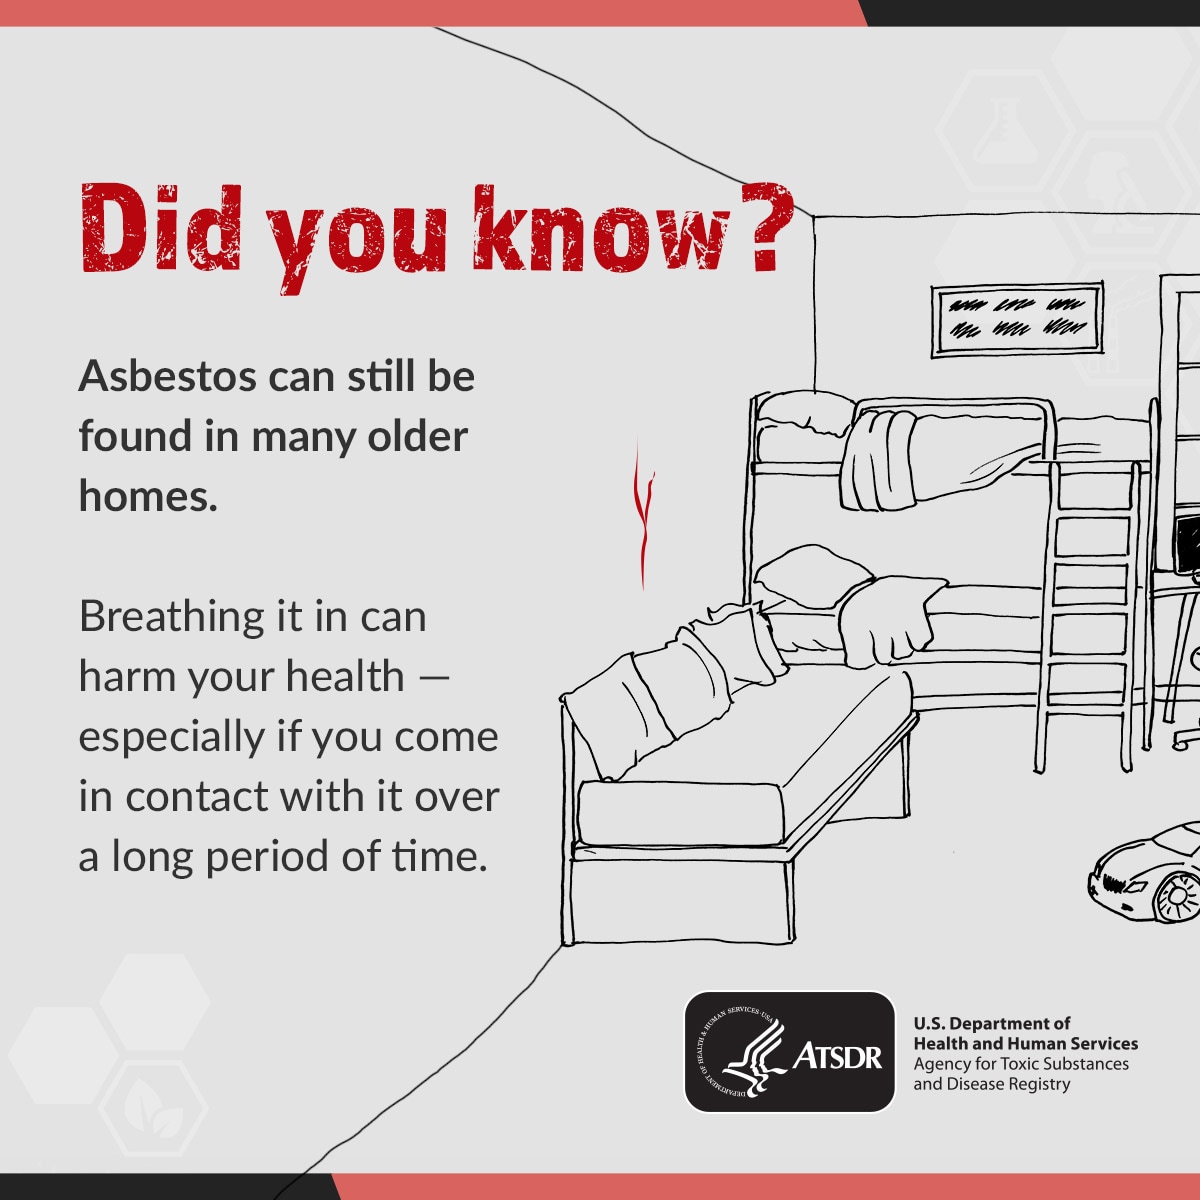 Asbestos can still be found in many older homes. Breathing it in can harm your health especially if you come in contact with it over a long period of time.